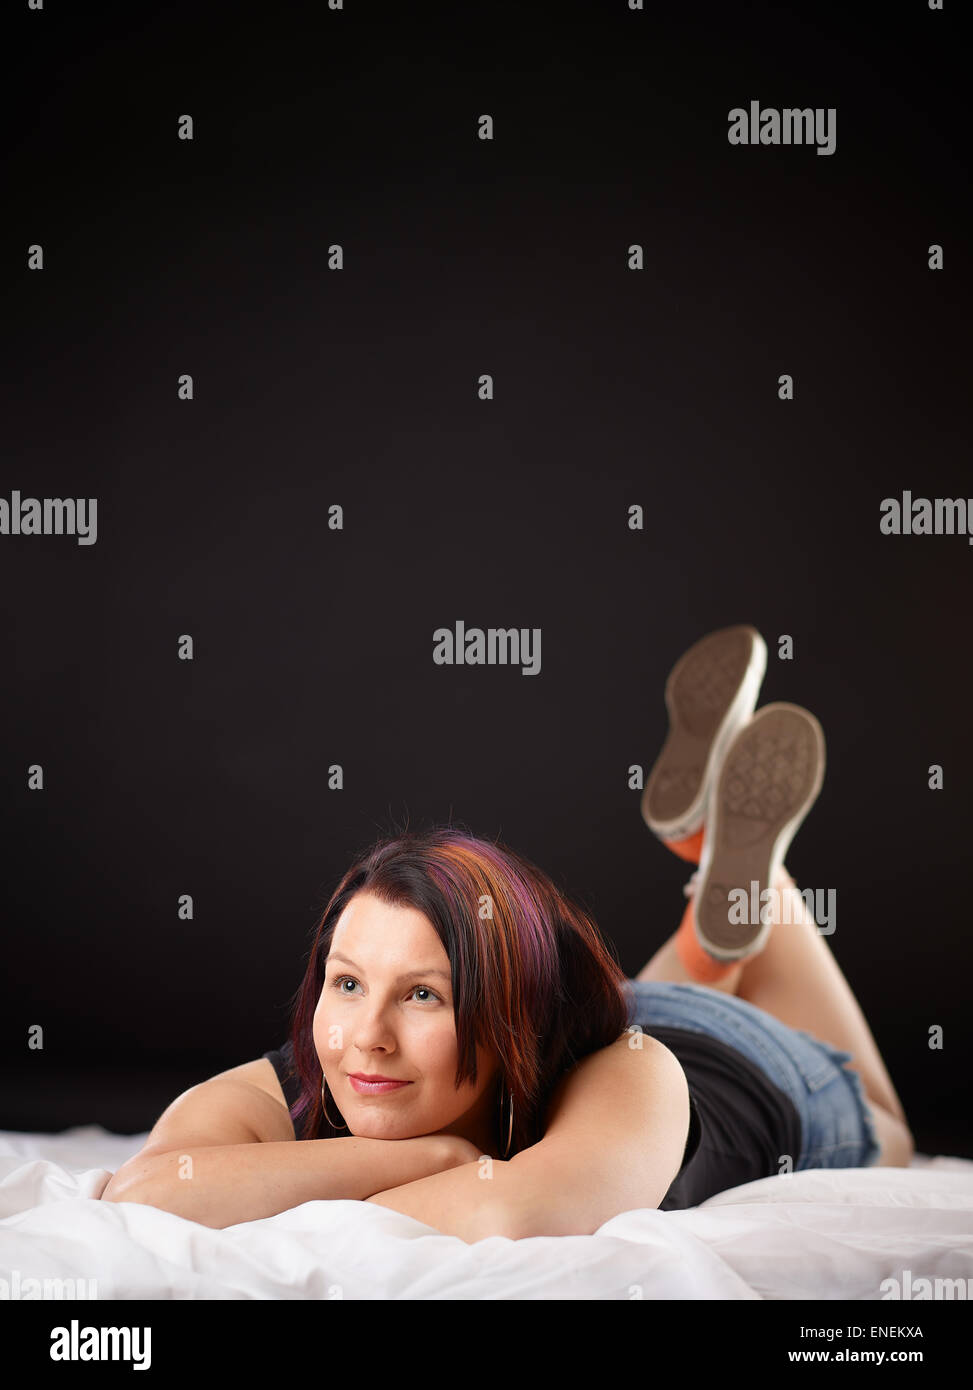 Girl on bed and sneakers Stock Photo